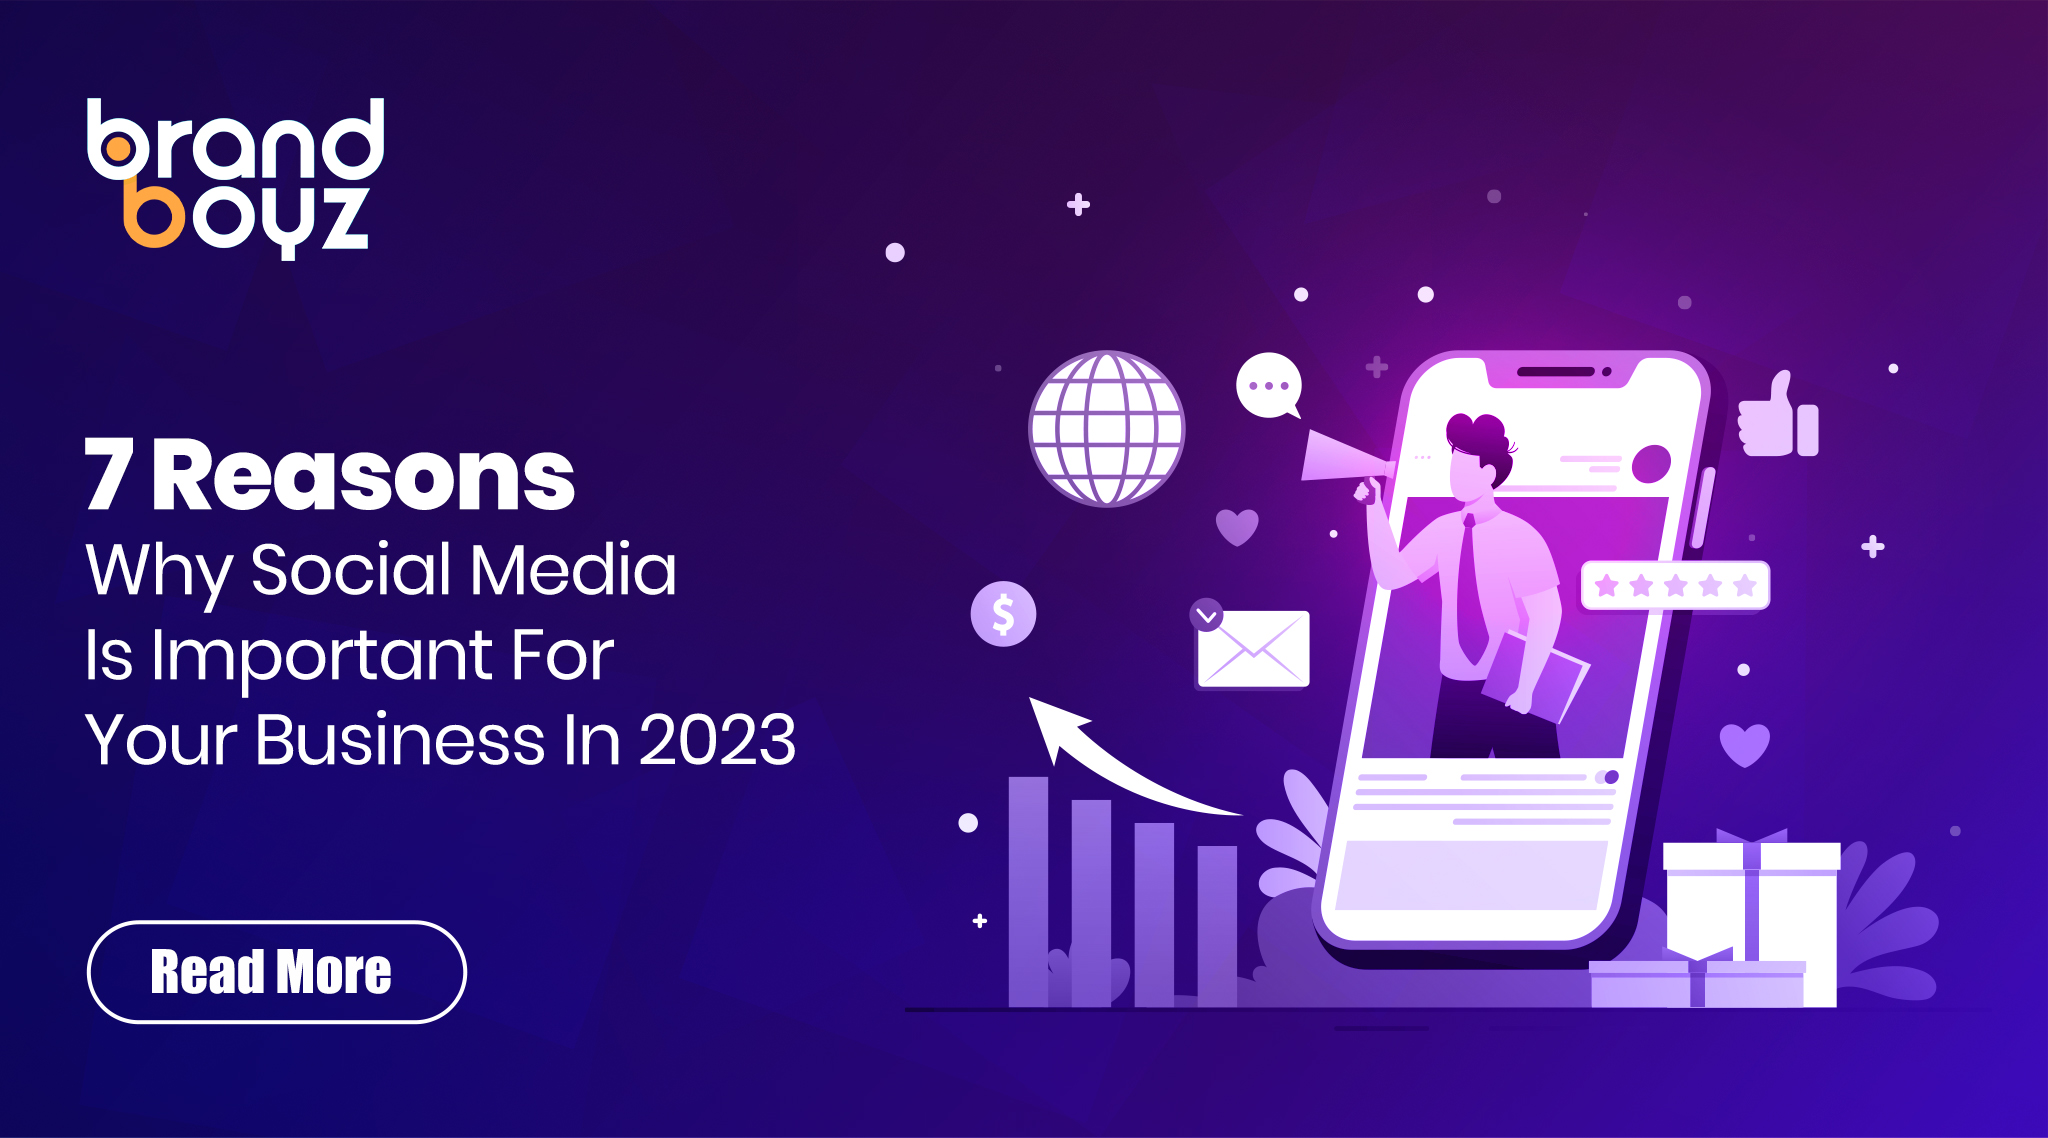 Top 7 Reasons Why Social Media is Important for your Business in 2023